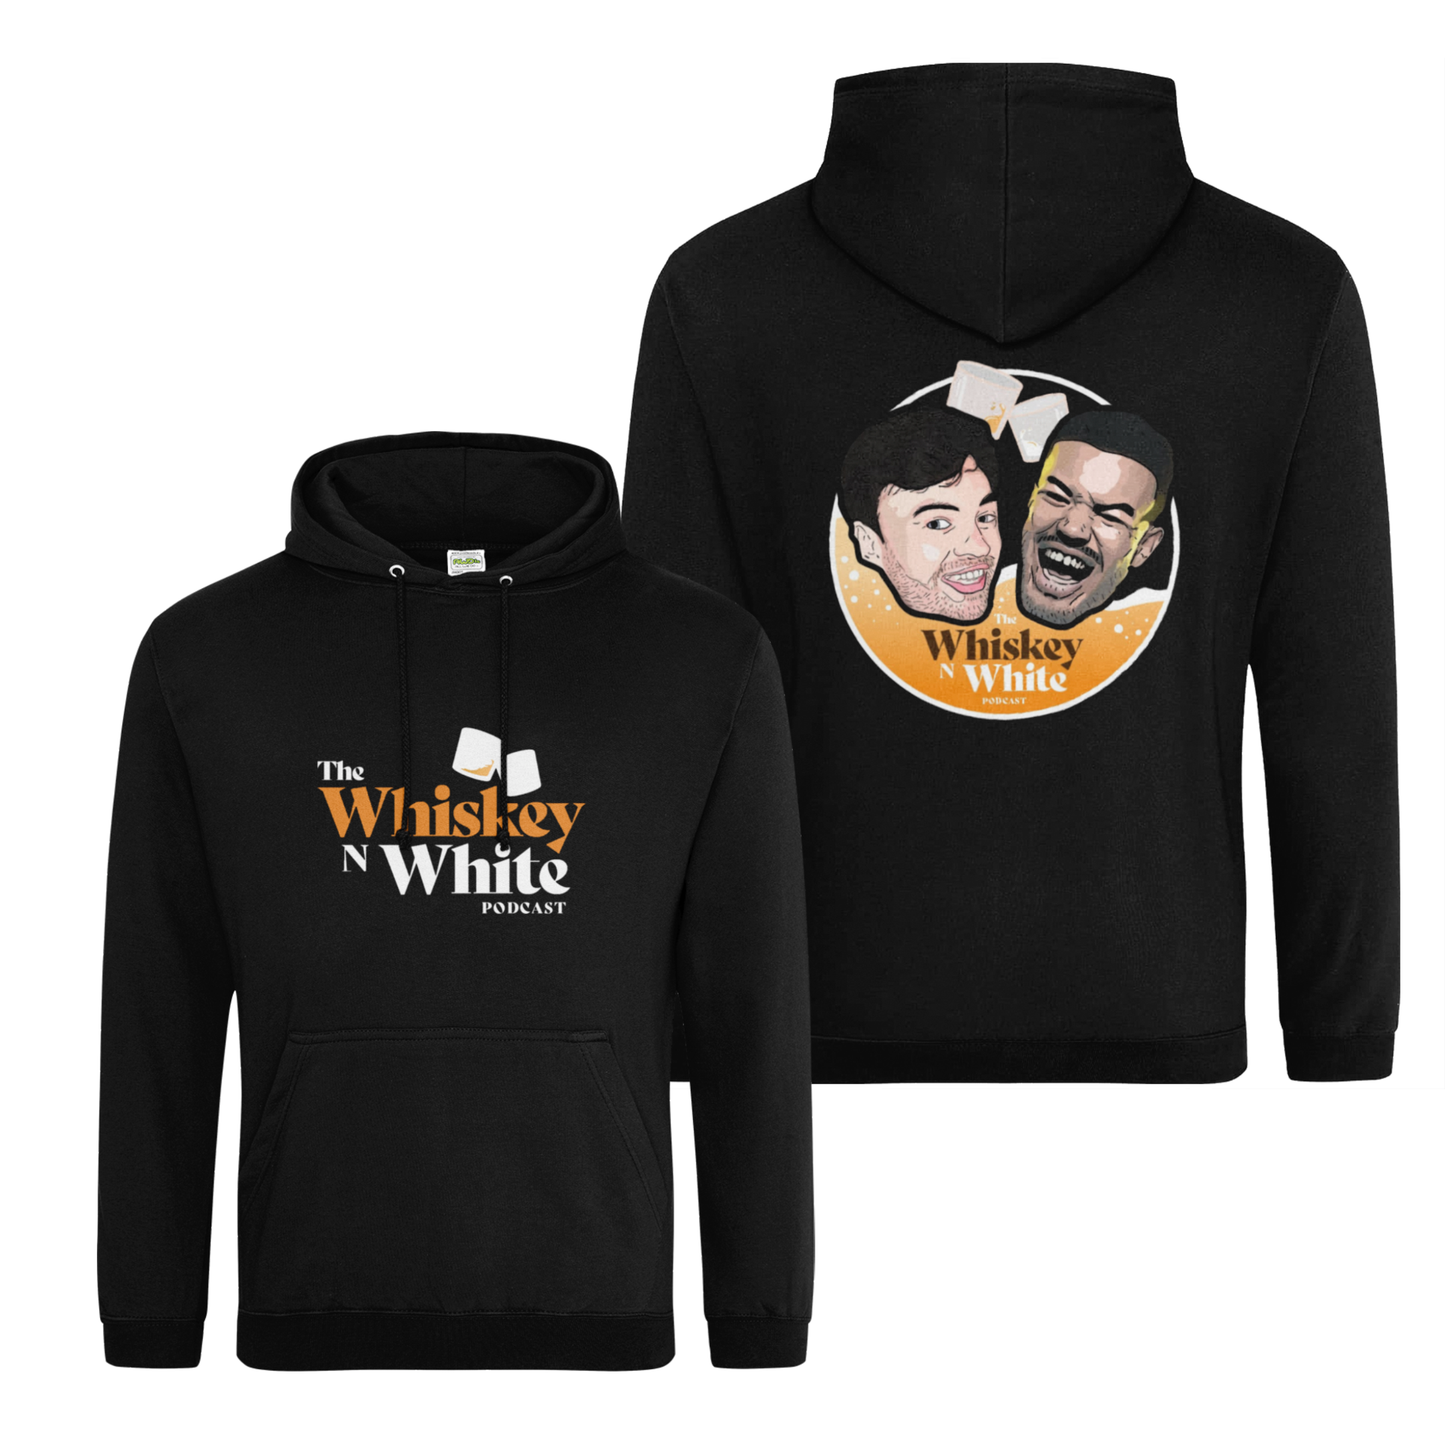 The Whiskey n White Podcast Unisex Hoodie